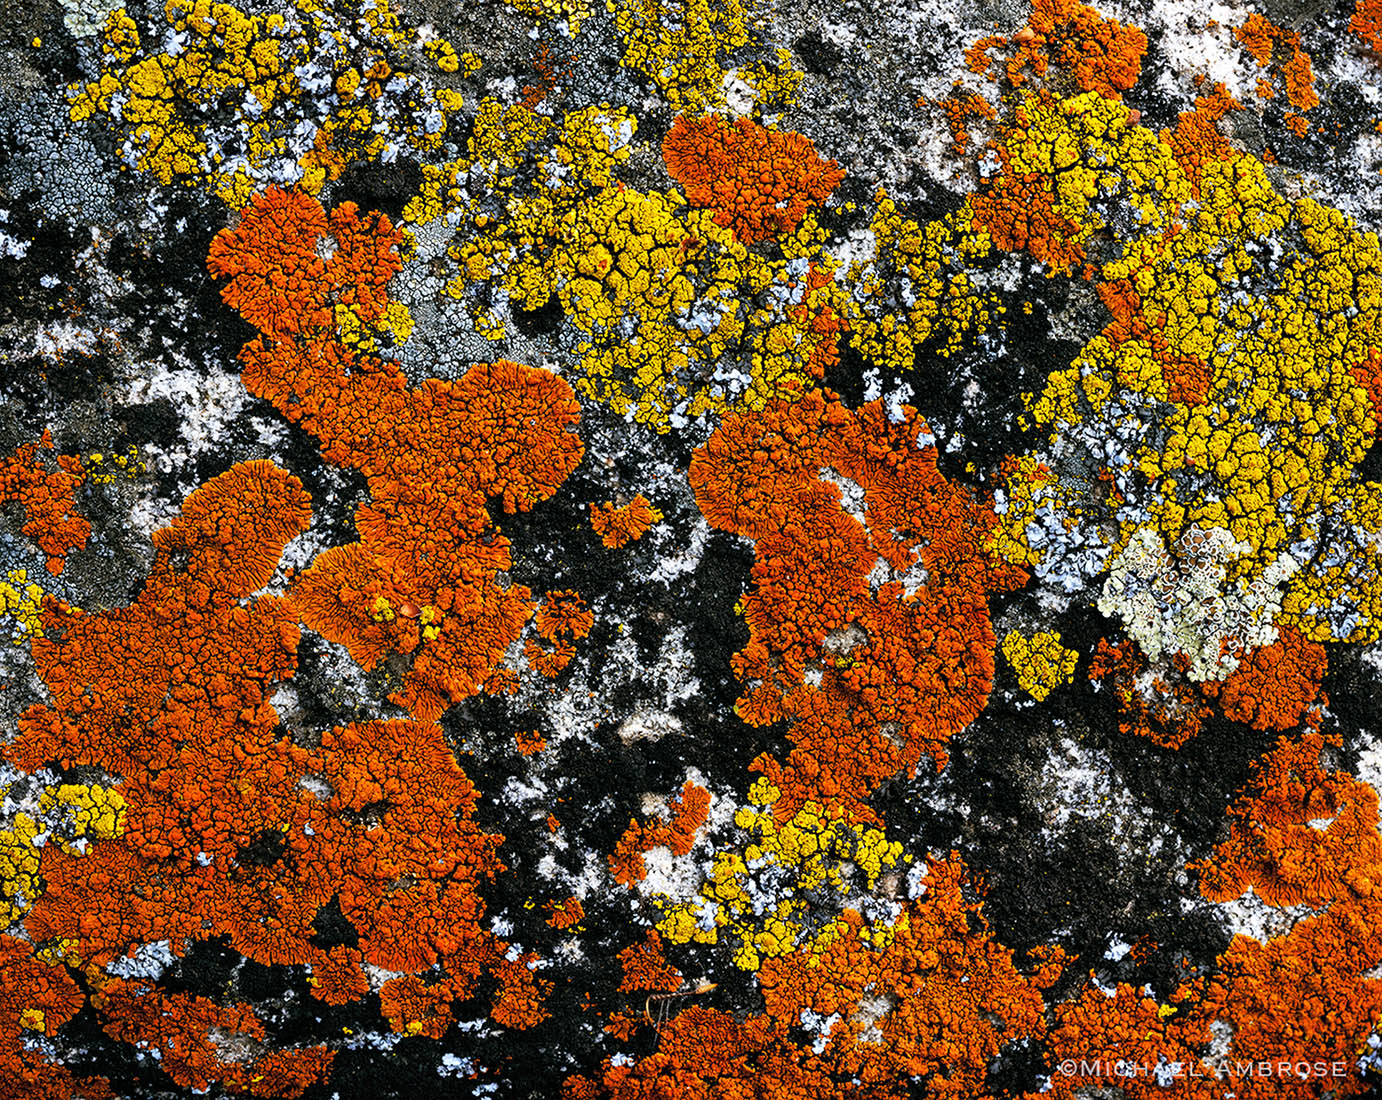 Slow growing and very old lichen has formed a permanent bond with this California granite in the Sierra Nevada Foothills near Yosemite.